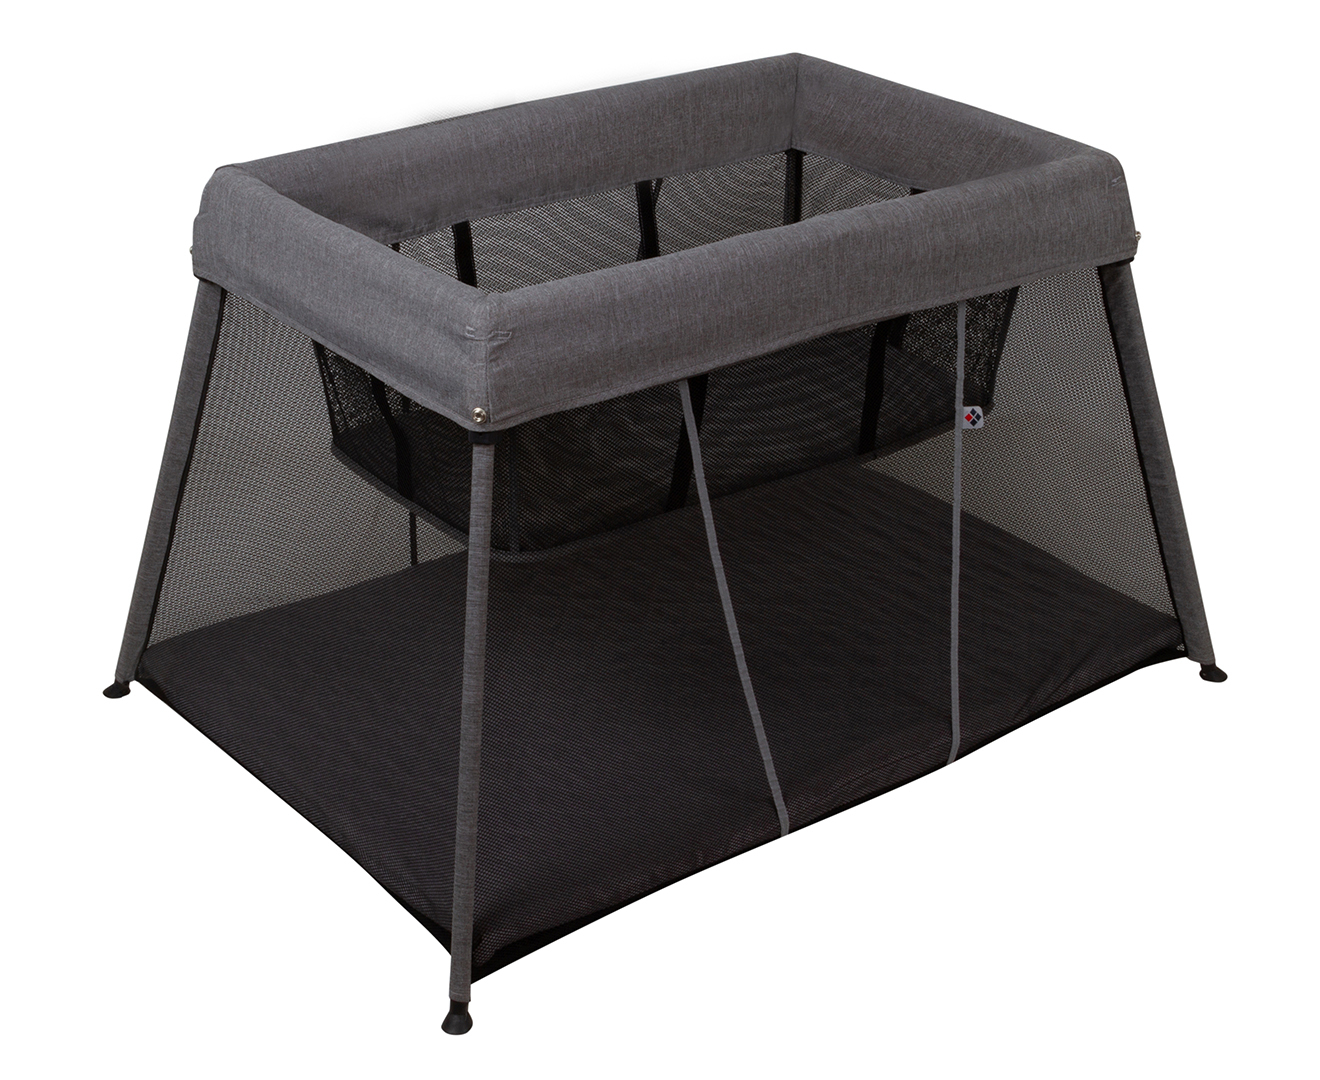 Bebe Care In & Out Travel Portacot - Charcoal | Catch.com.au